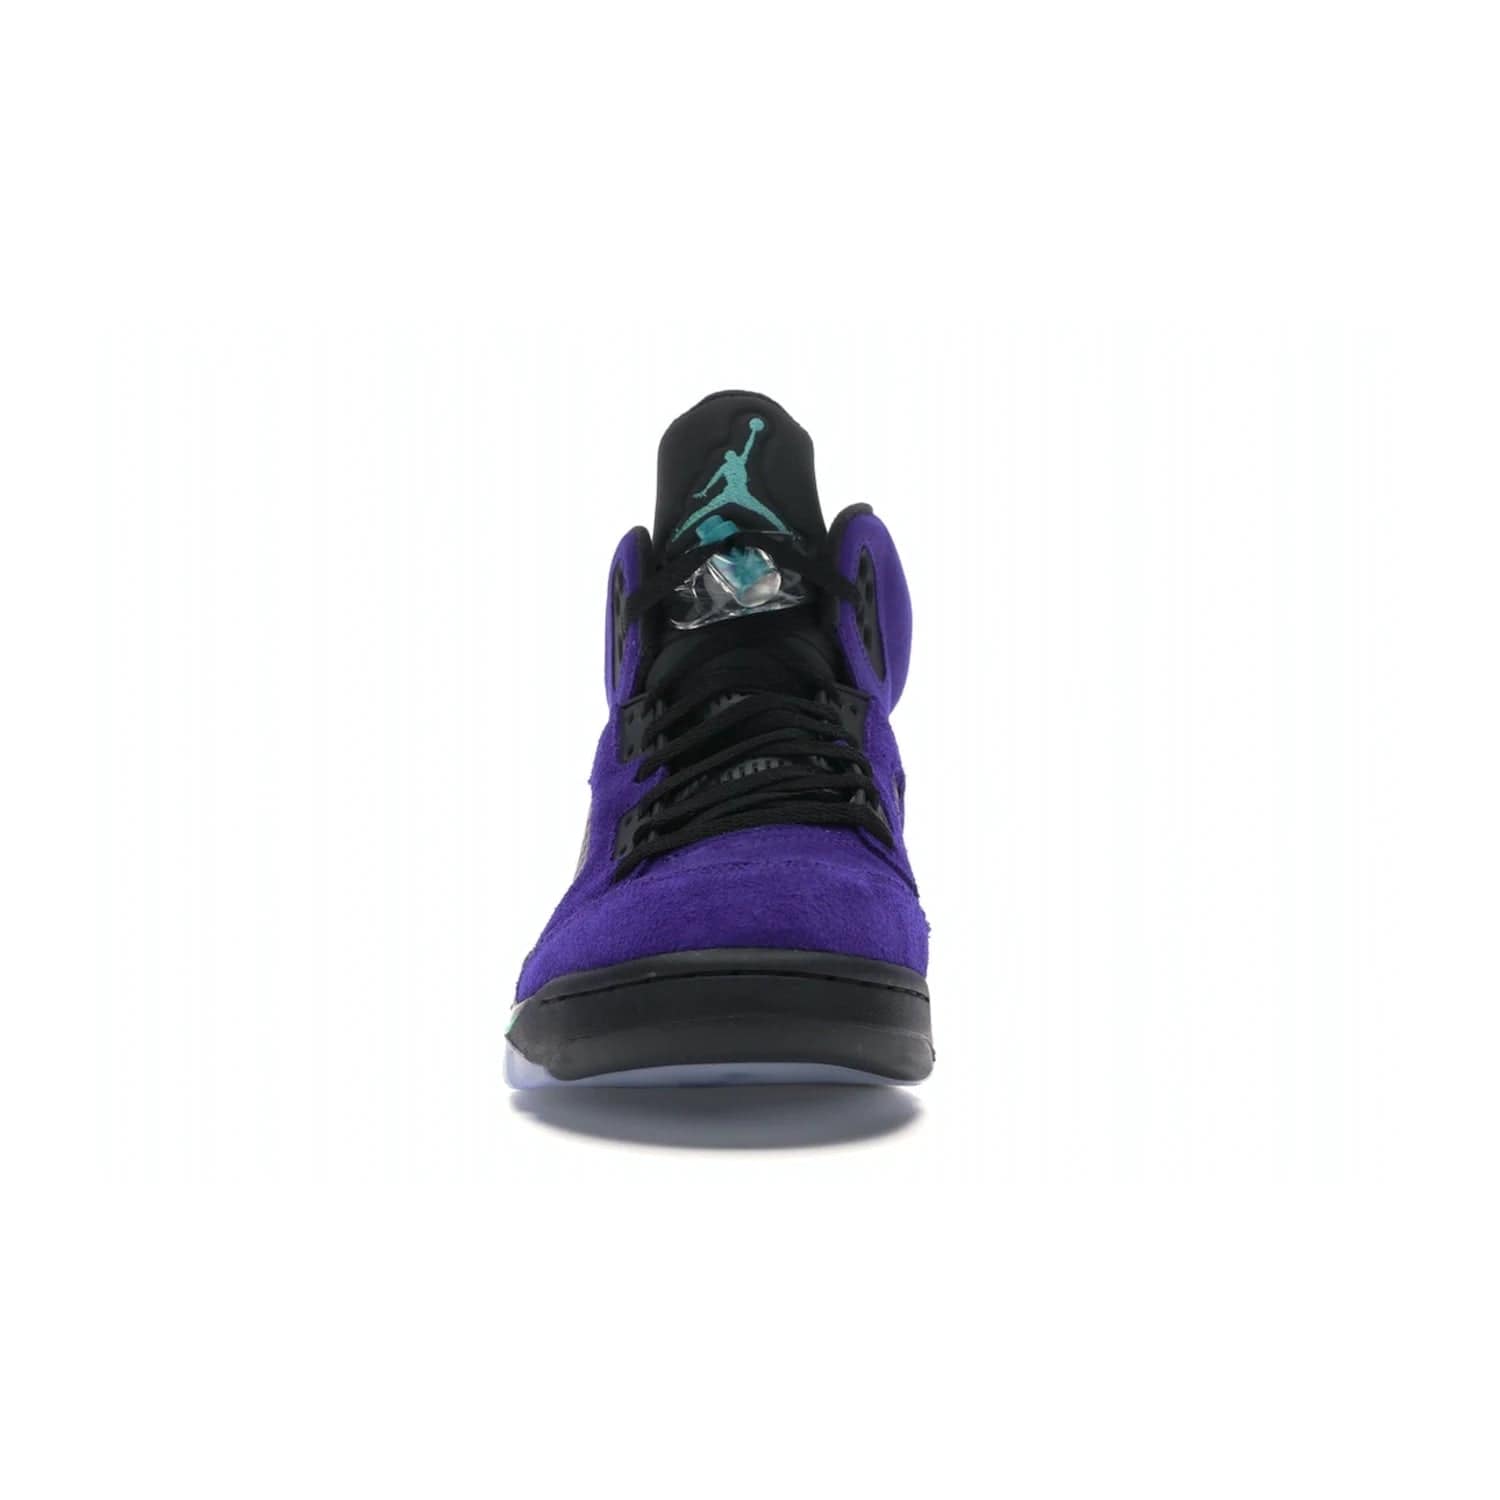 Jordan 5 Retro Alternate Grape - Image 10 - Only at www.BallersClubKickz.com - Bring the classic Jordan 5 Retro Alternate Grape to your sneaker collection! Featuring a purple suede upper, charcoal underlays, green detailing, and an icy and green outsole. Releasing for the first time since 1990, don't miss this chance to add a piece of sneaker history to your collection.